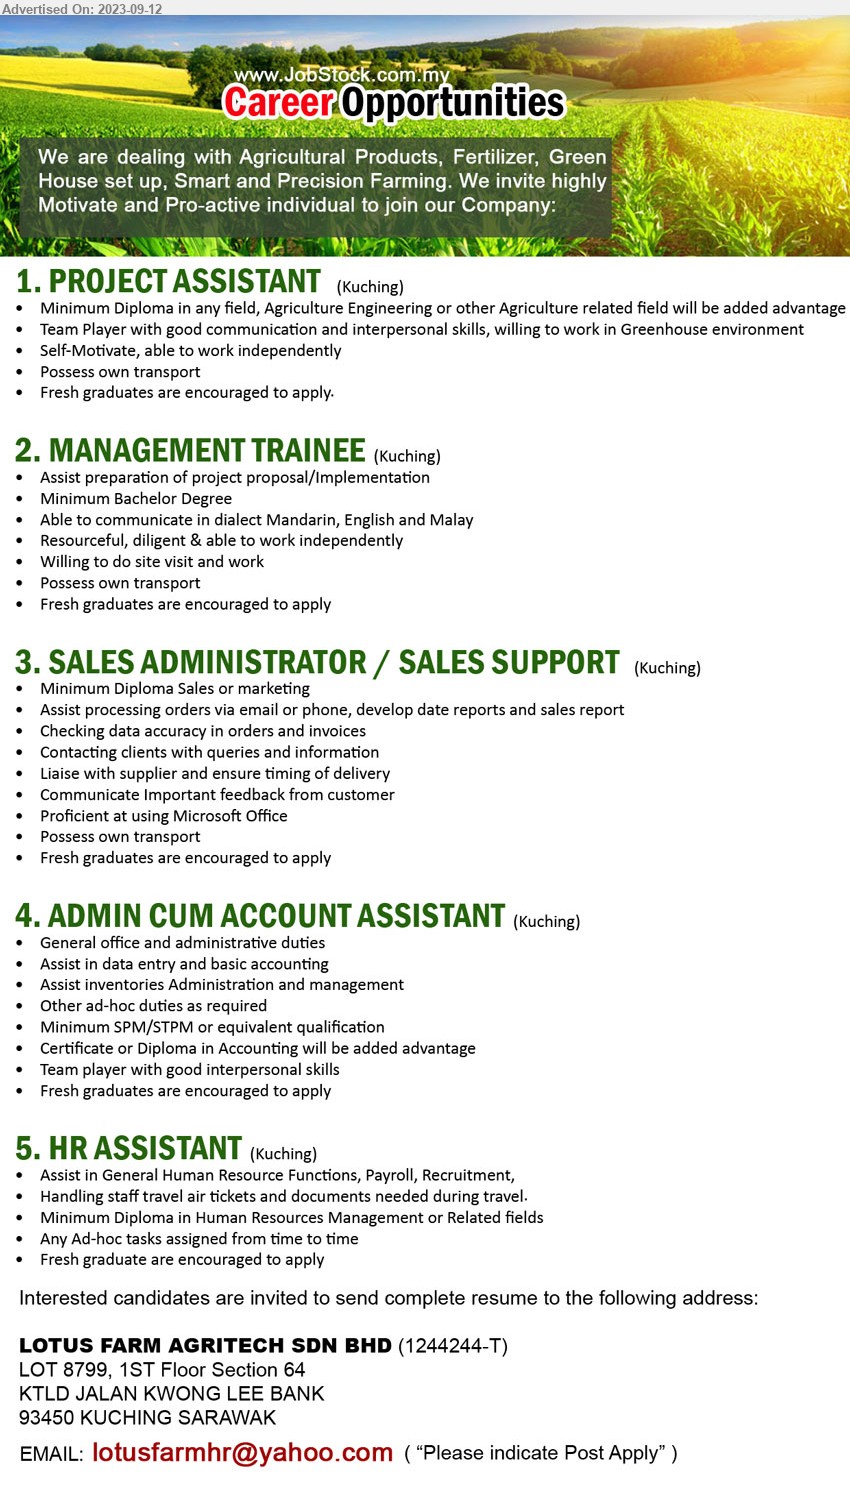 LOTUS FARM AGRITECH SDN BHD - 1. PROJECT ASSISTANT (Kuching),  Diploma in any field, Agriculture Engineering or other Agriculture,...
2. MANAGEMENT TRAINEE (Kuching),  Bachelor Degree, Fresh graduates are encouraged to apply,...
3. SALES ADMINISTRATOR / SALES SUPPORT (Kuching), Diploma Sales or marketing, Assist processing orders via email or phone, develop date reports and sales report,...
4. ADMIN CUM ACCOUNT ASSISTANT (Kuching), SPM/STPM, Certificate or Diploma in Accounting,...
5. HR ASSISTANT (Kuching), Diploma in Human Resources Management, Assist in General Human Resource Functions, Payroll, Recruitment, ...
Email resume to ...